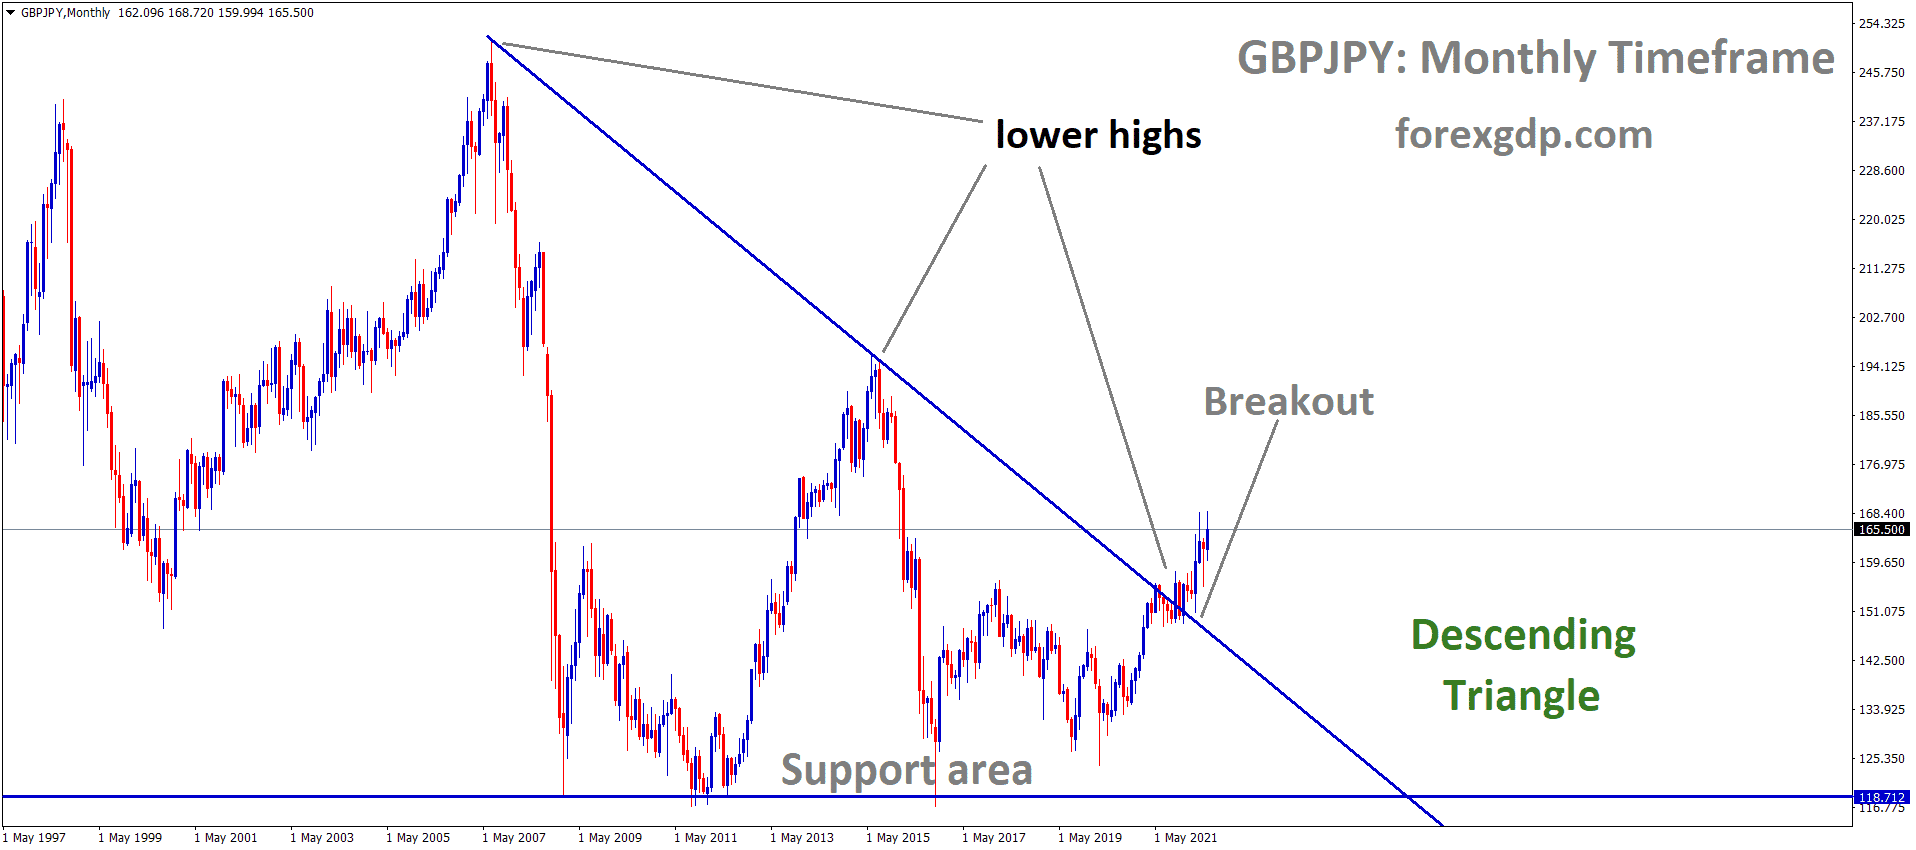 GBPJPY Monthly Time Frame Analysis Market has Broken the Descending triangle pattern 1